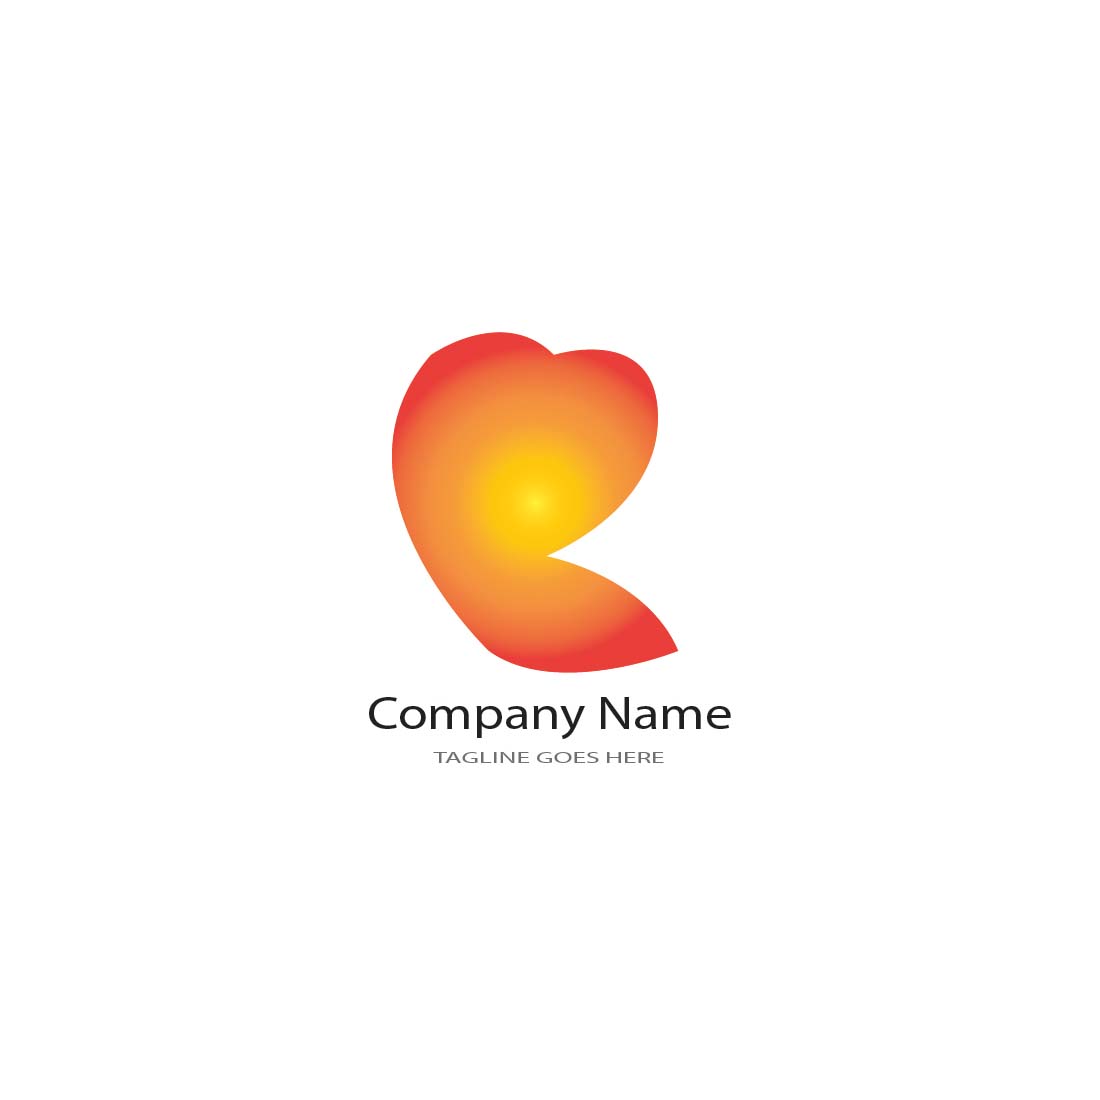 Heart shaped logo on a white background.